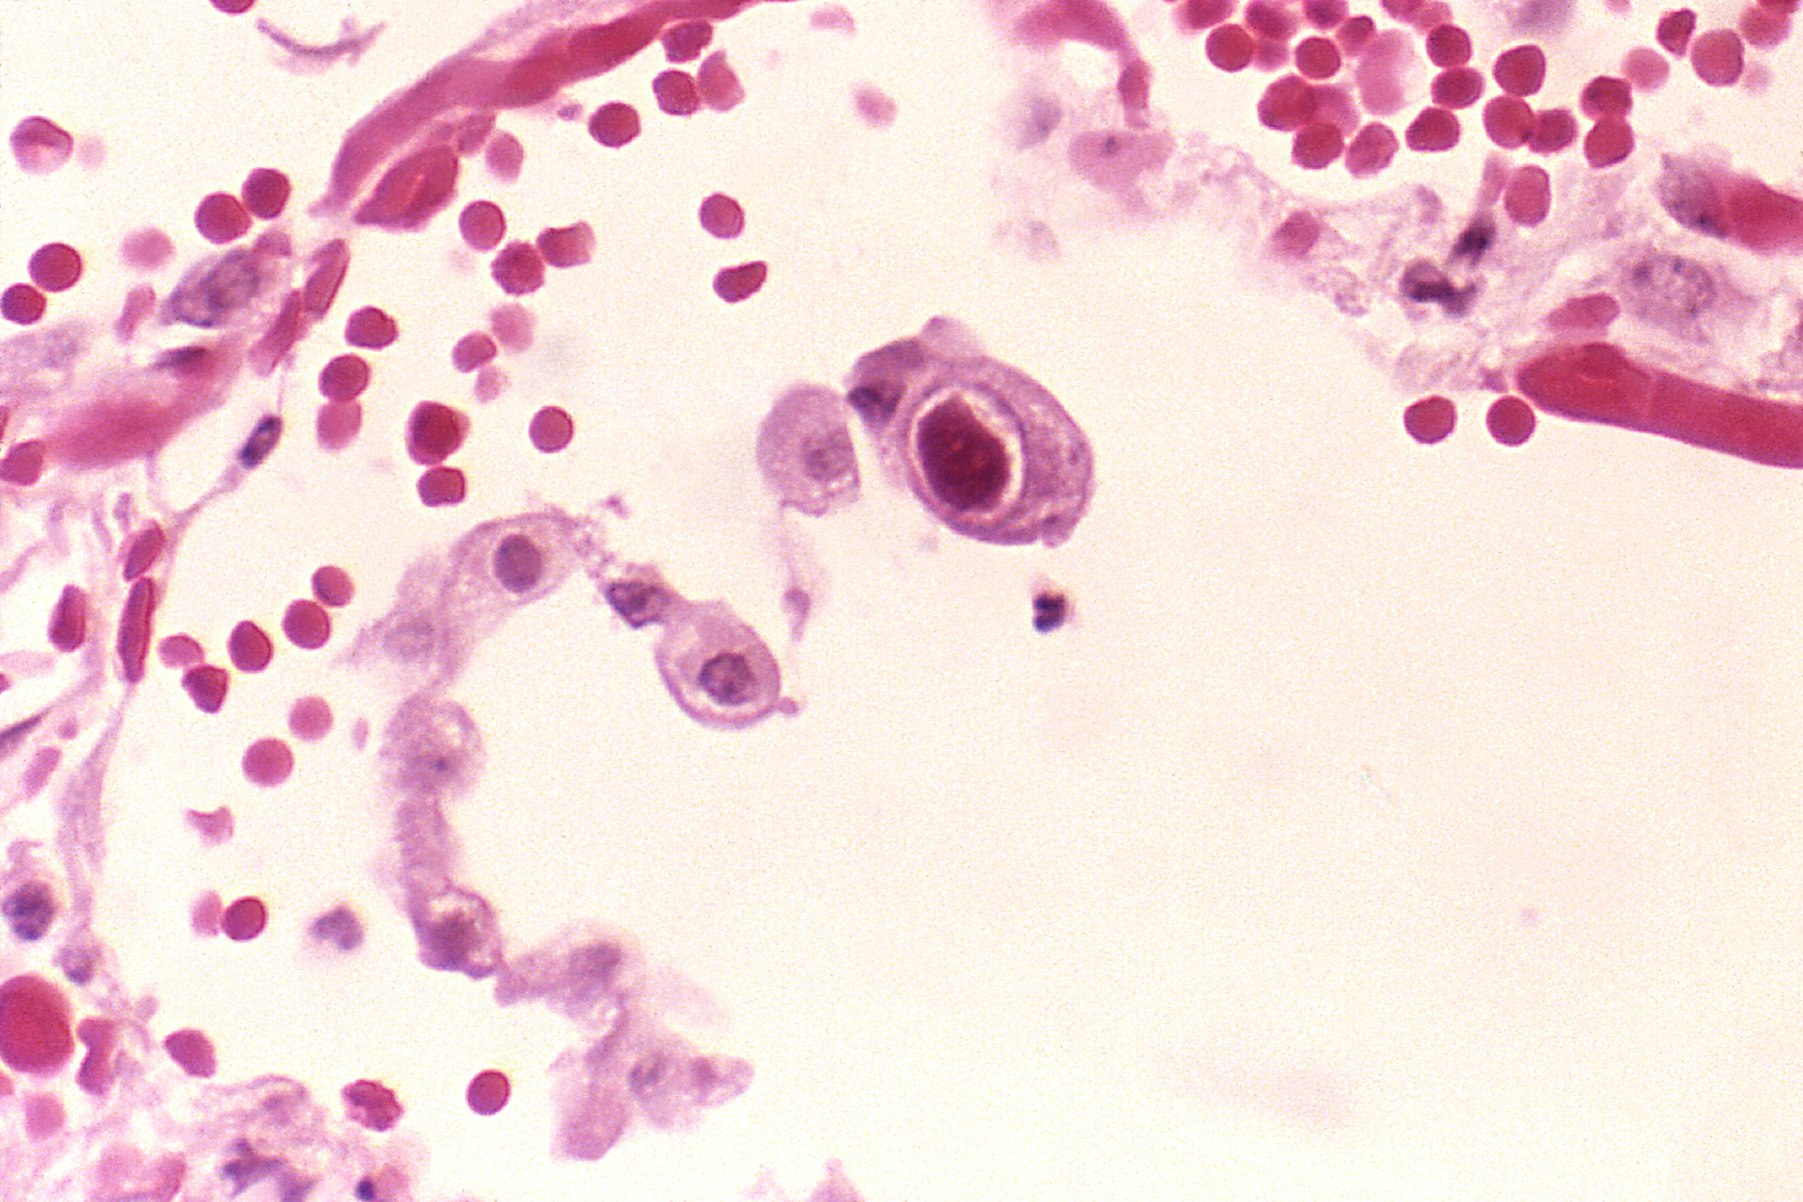 Lung tissue with a HCMV infection